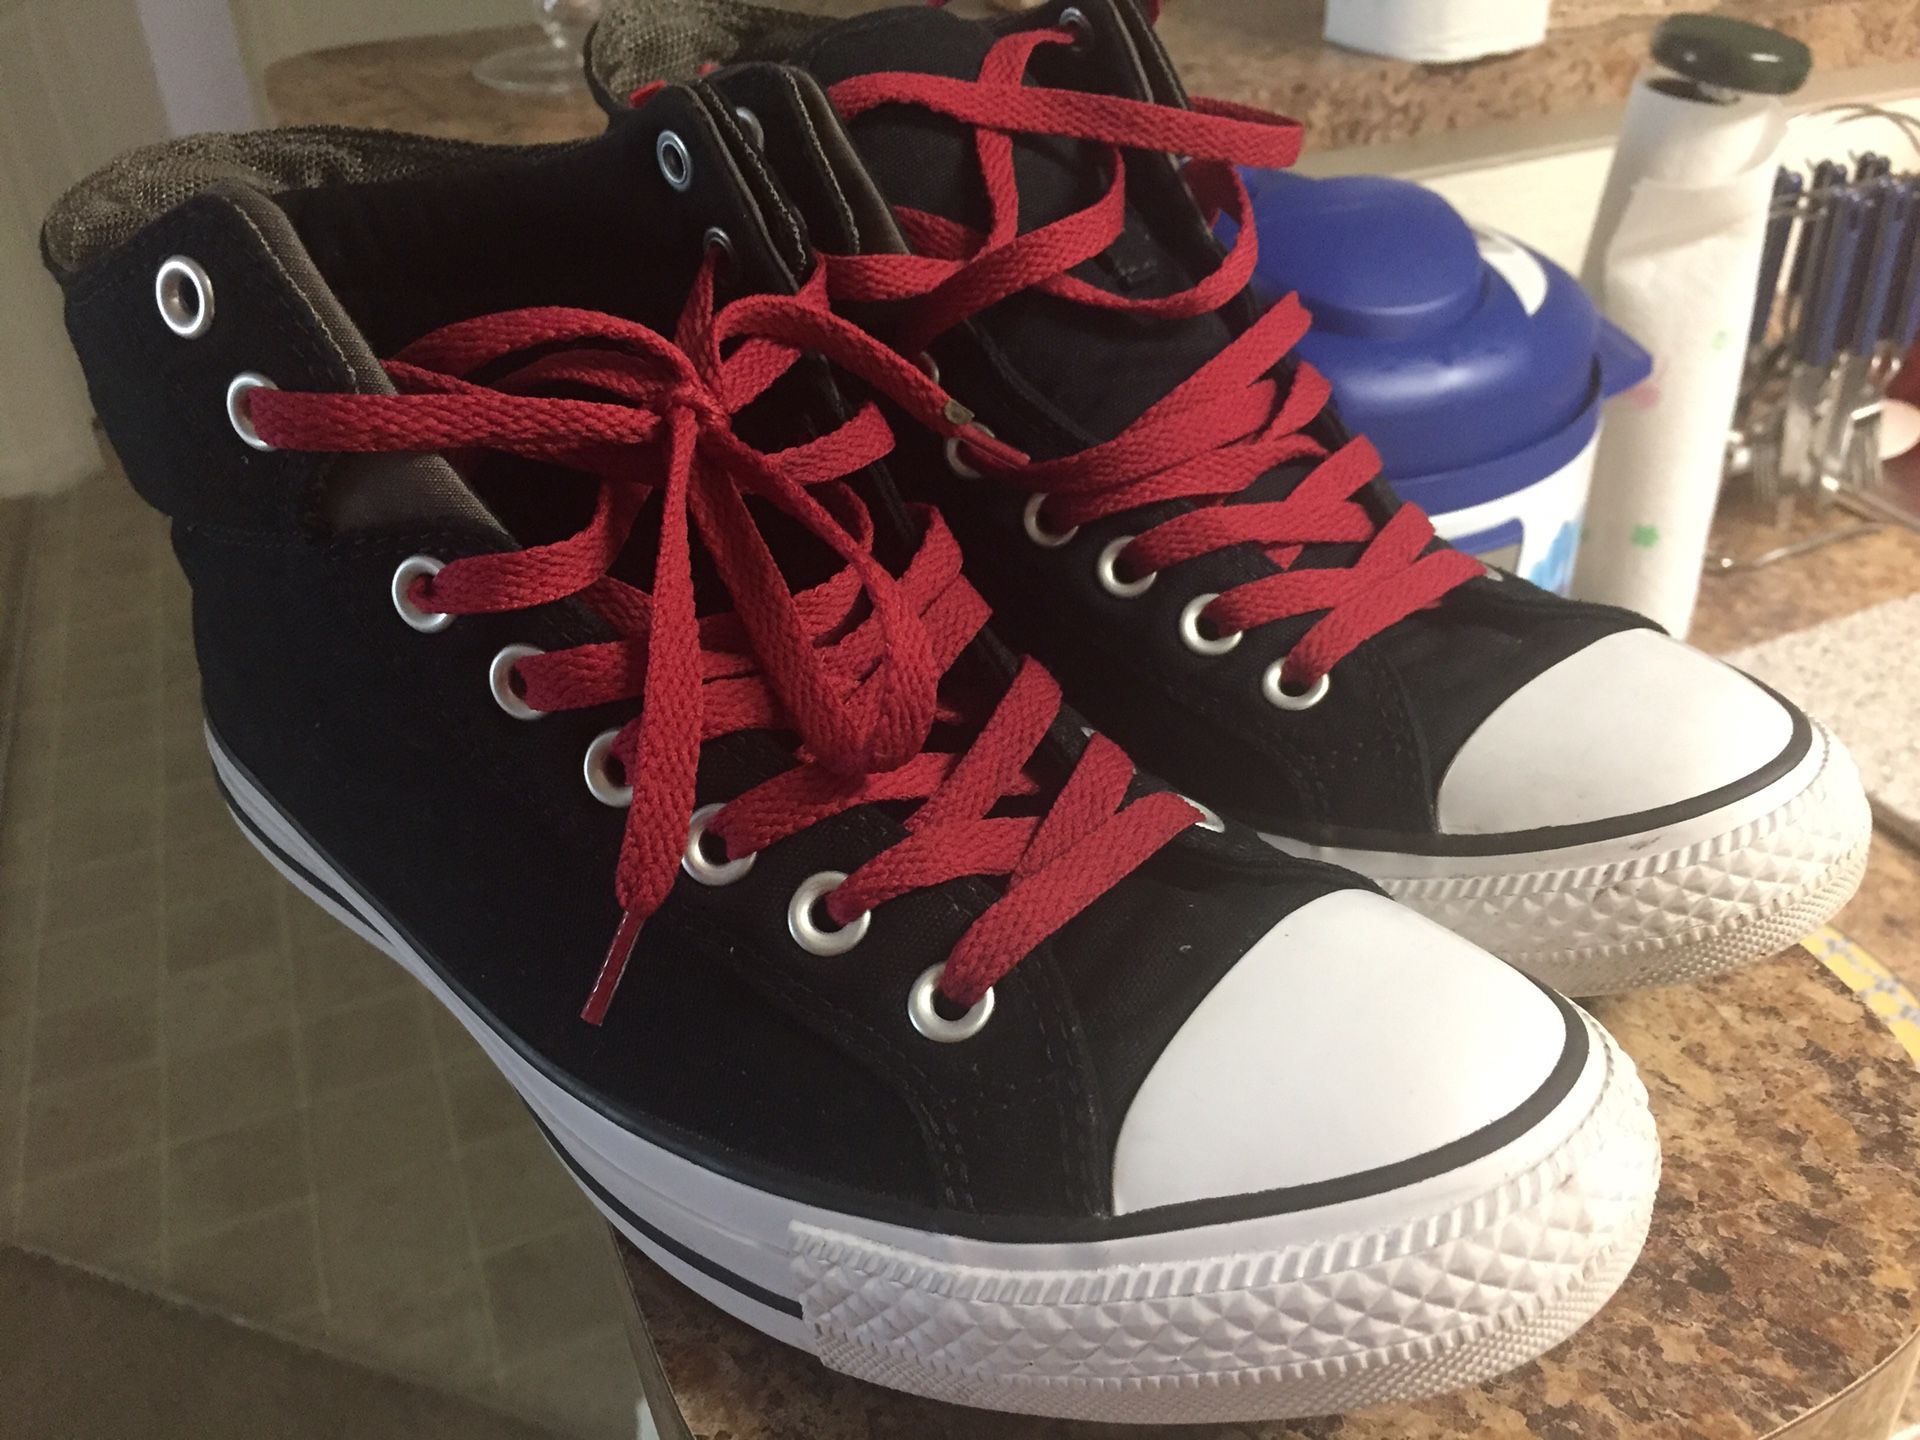 Converse all star size 10 very clean